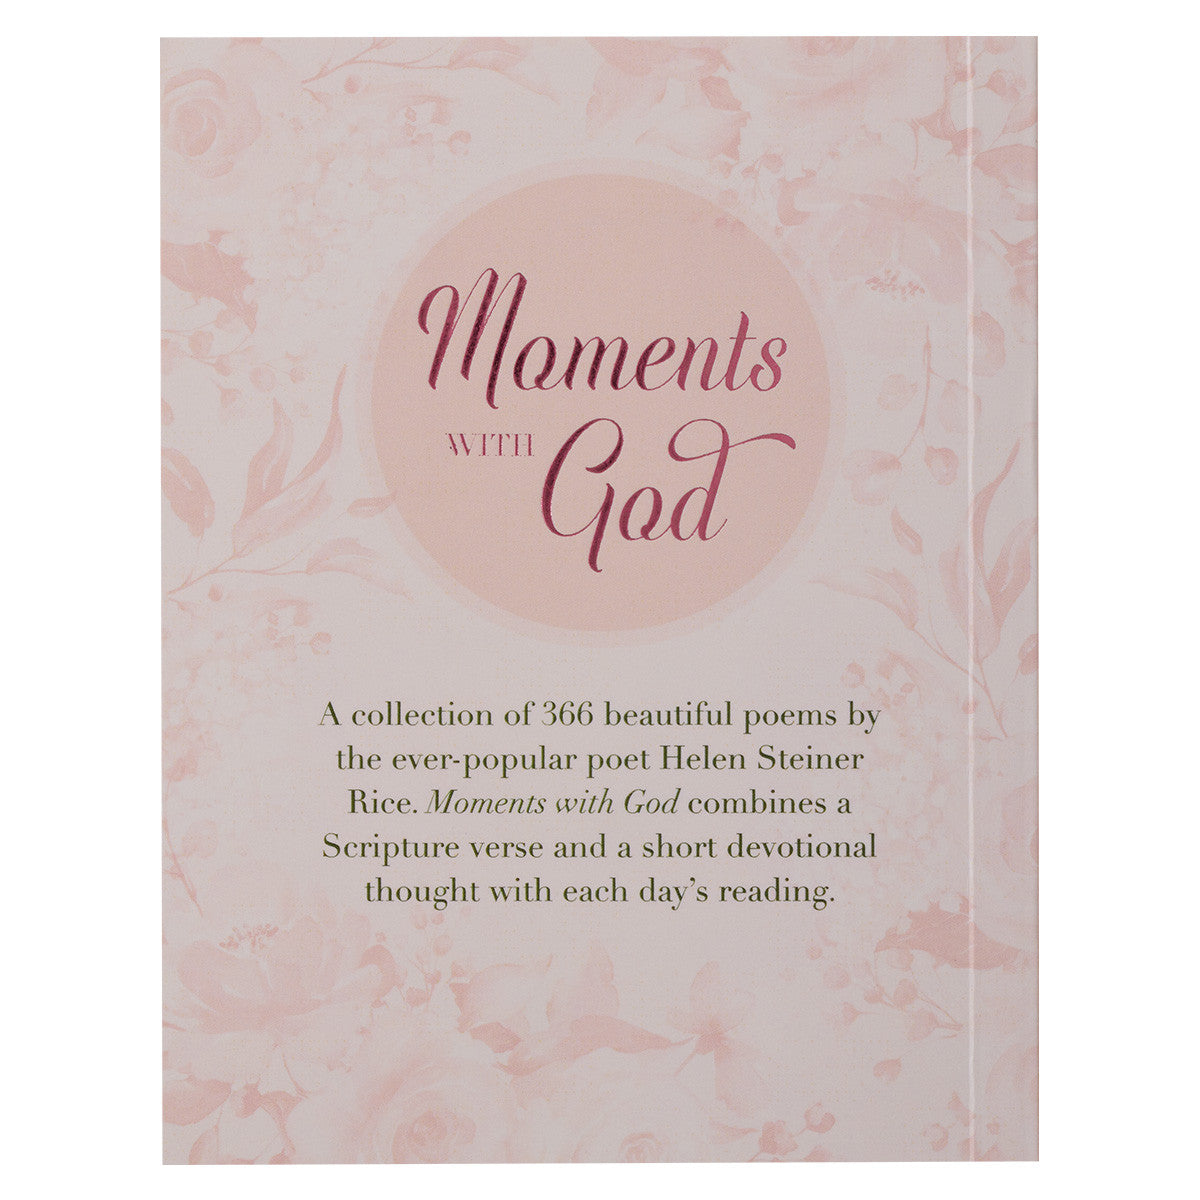 One-Minute Devotions: Moments with God - The Christian Gift Company